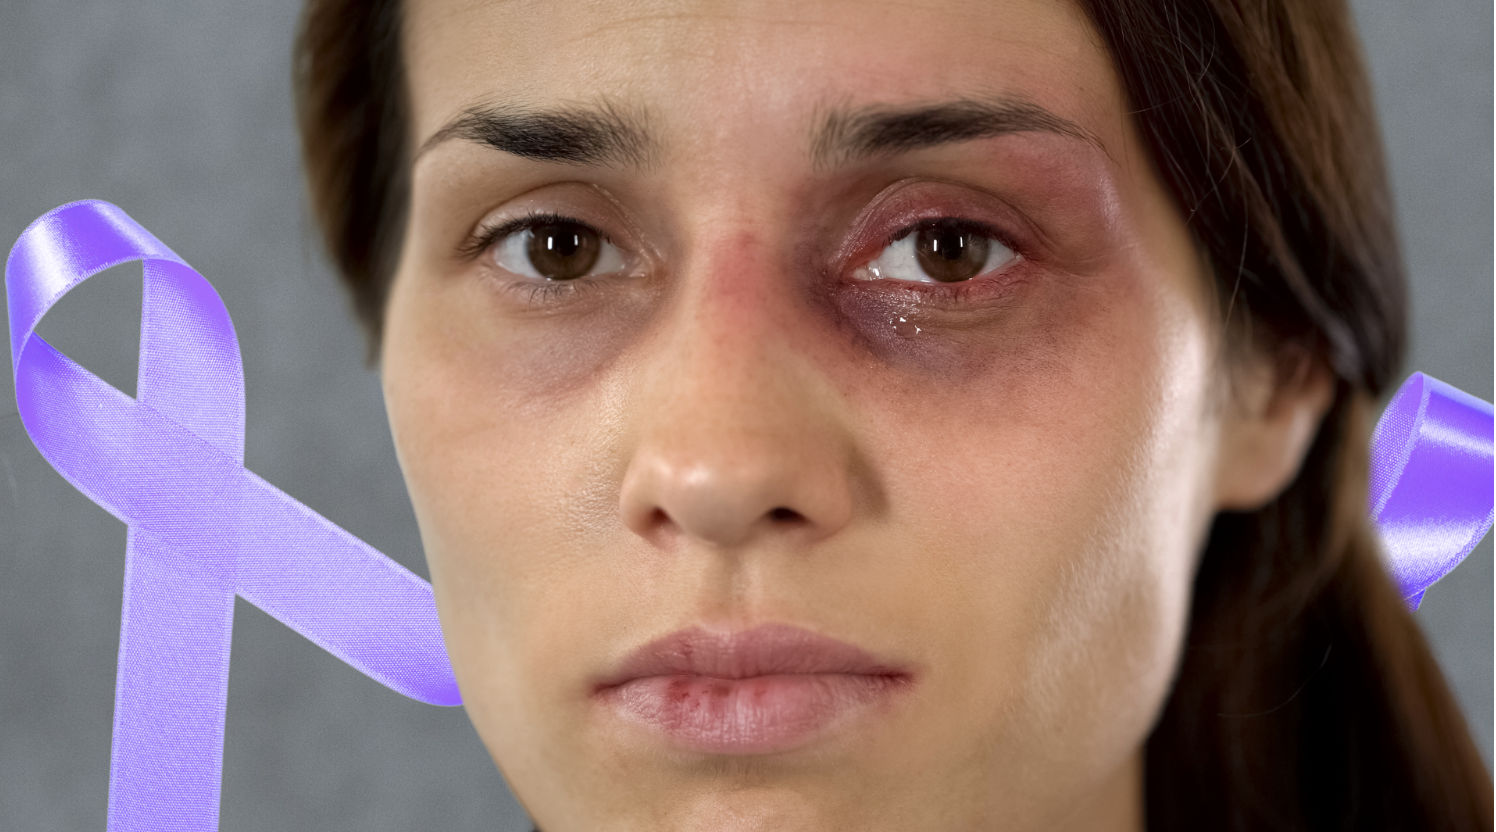 Woman with bruised face and purple ribbon behind her